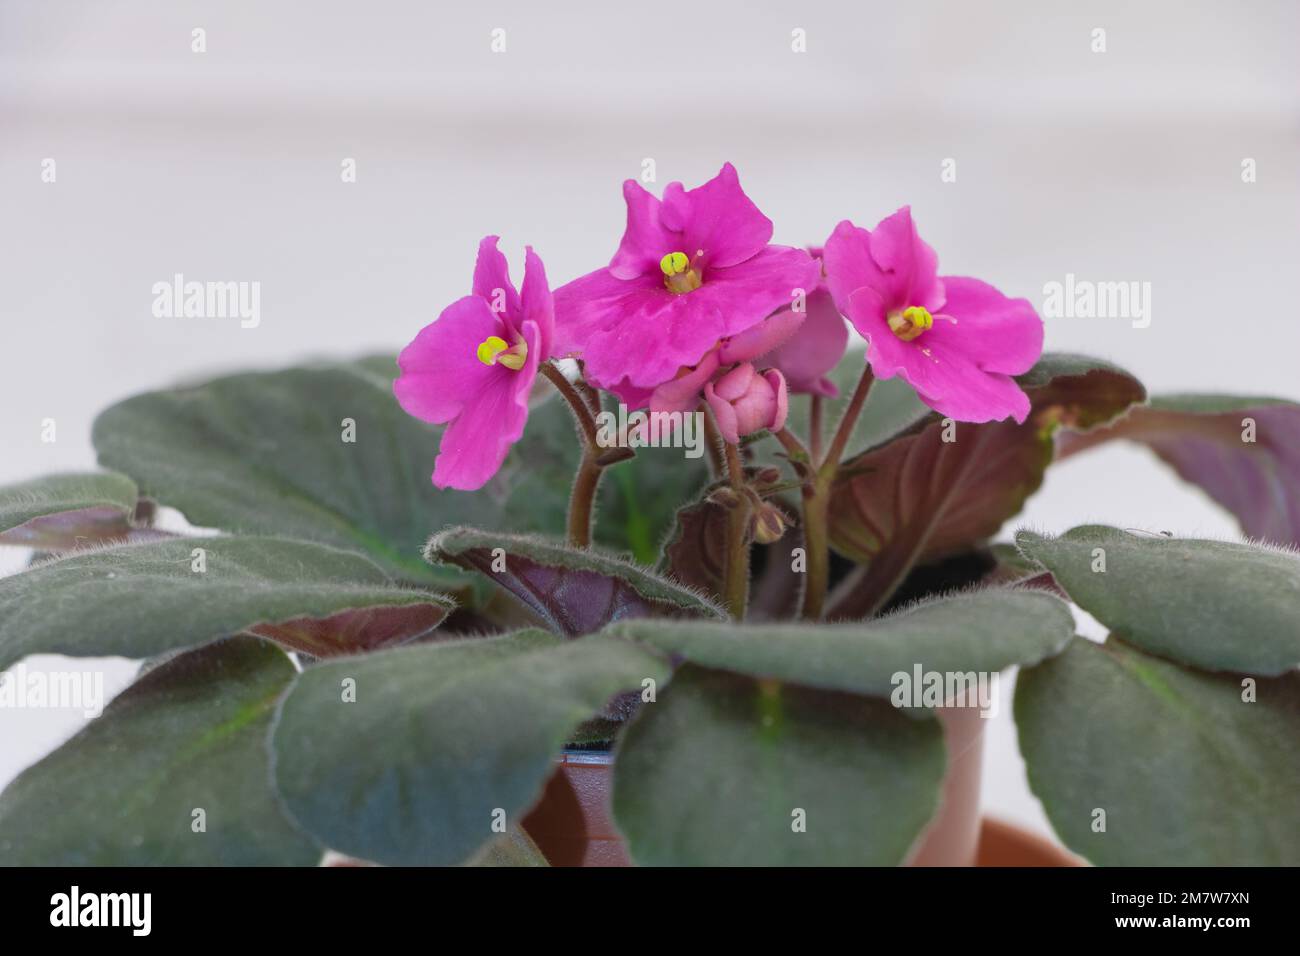 A Delicate Pink: A Shot of African Violet in Bloom on a White Background. Stock Photo